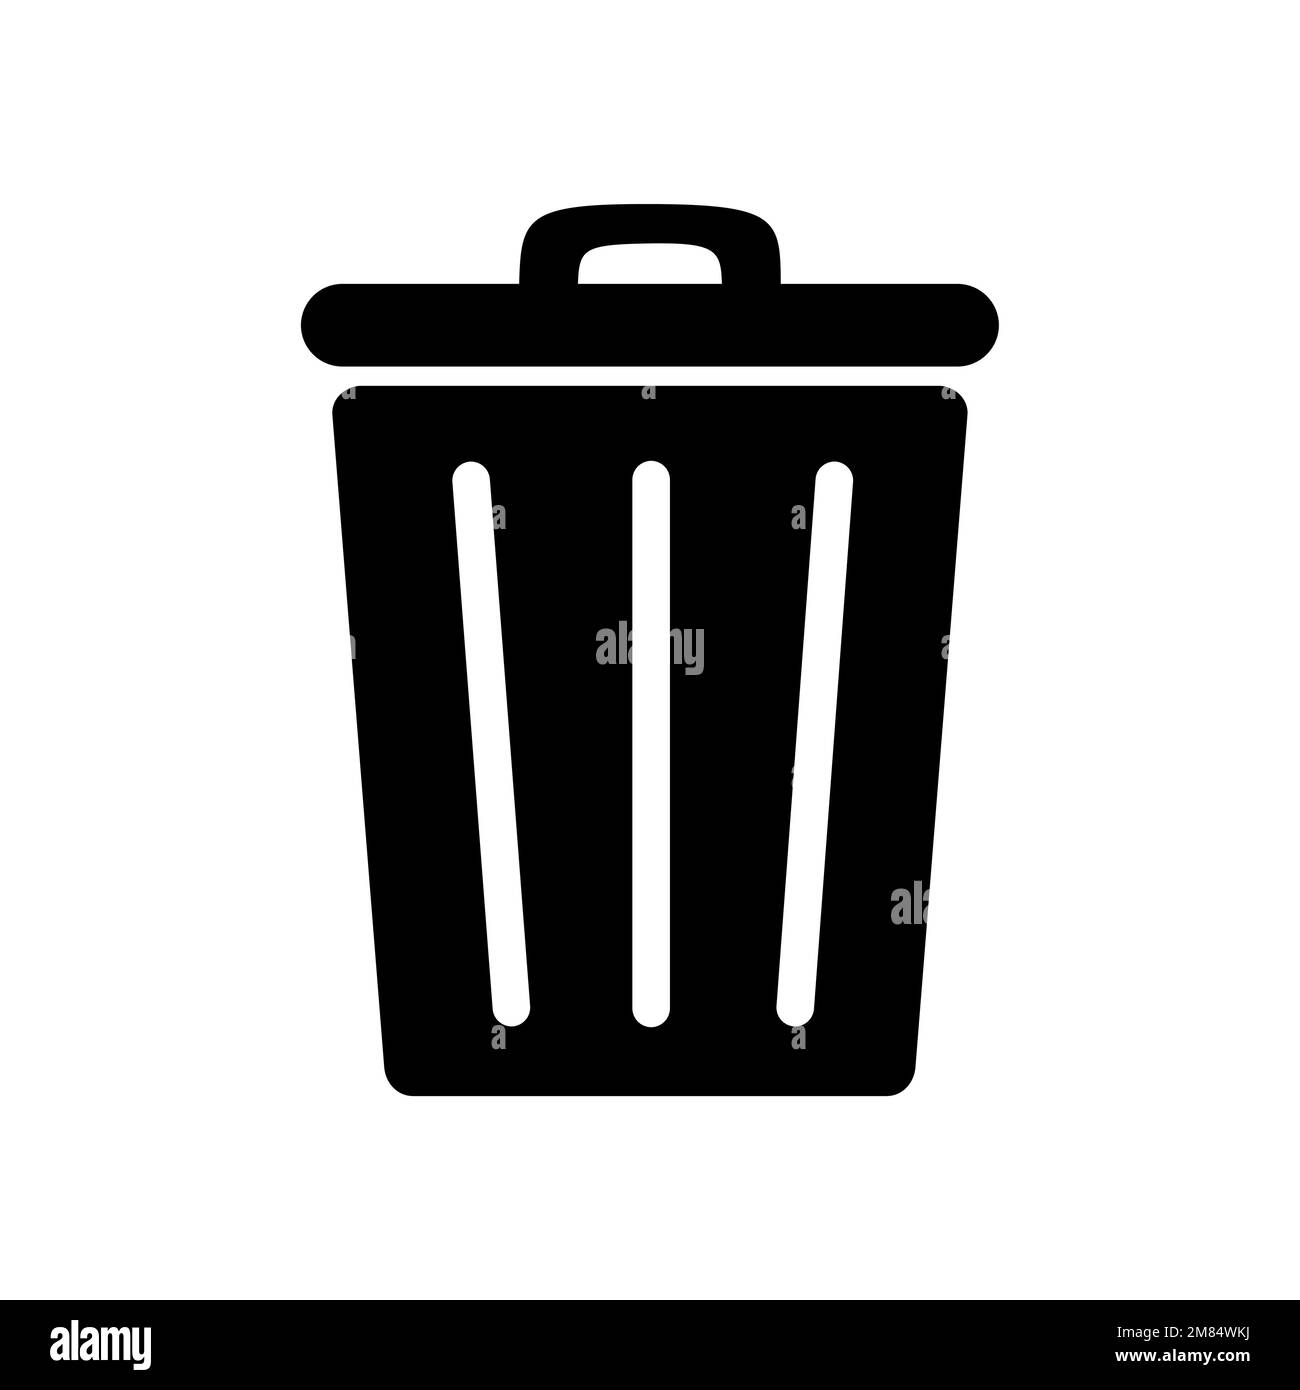 GARBAGE BASKET PICTOGRAM IN BLACK COLOR, ISOLATED Stock Vector